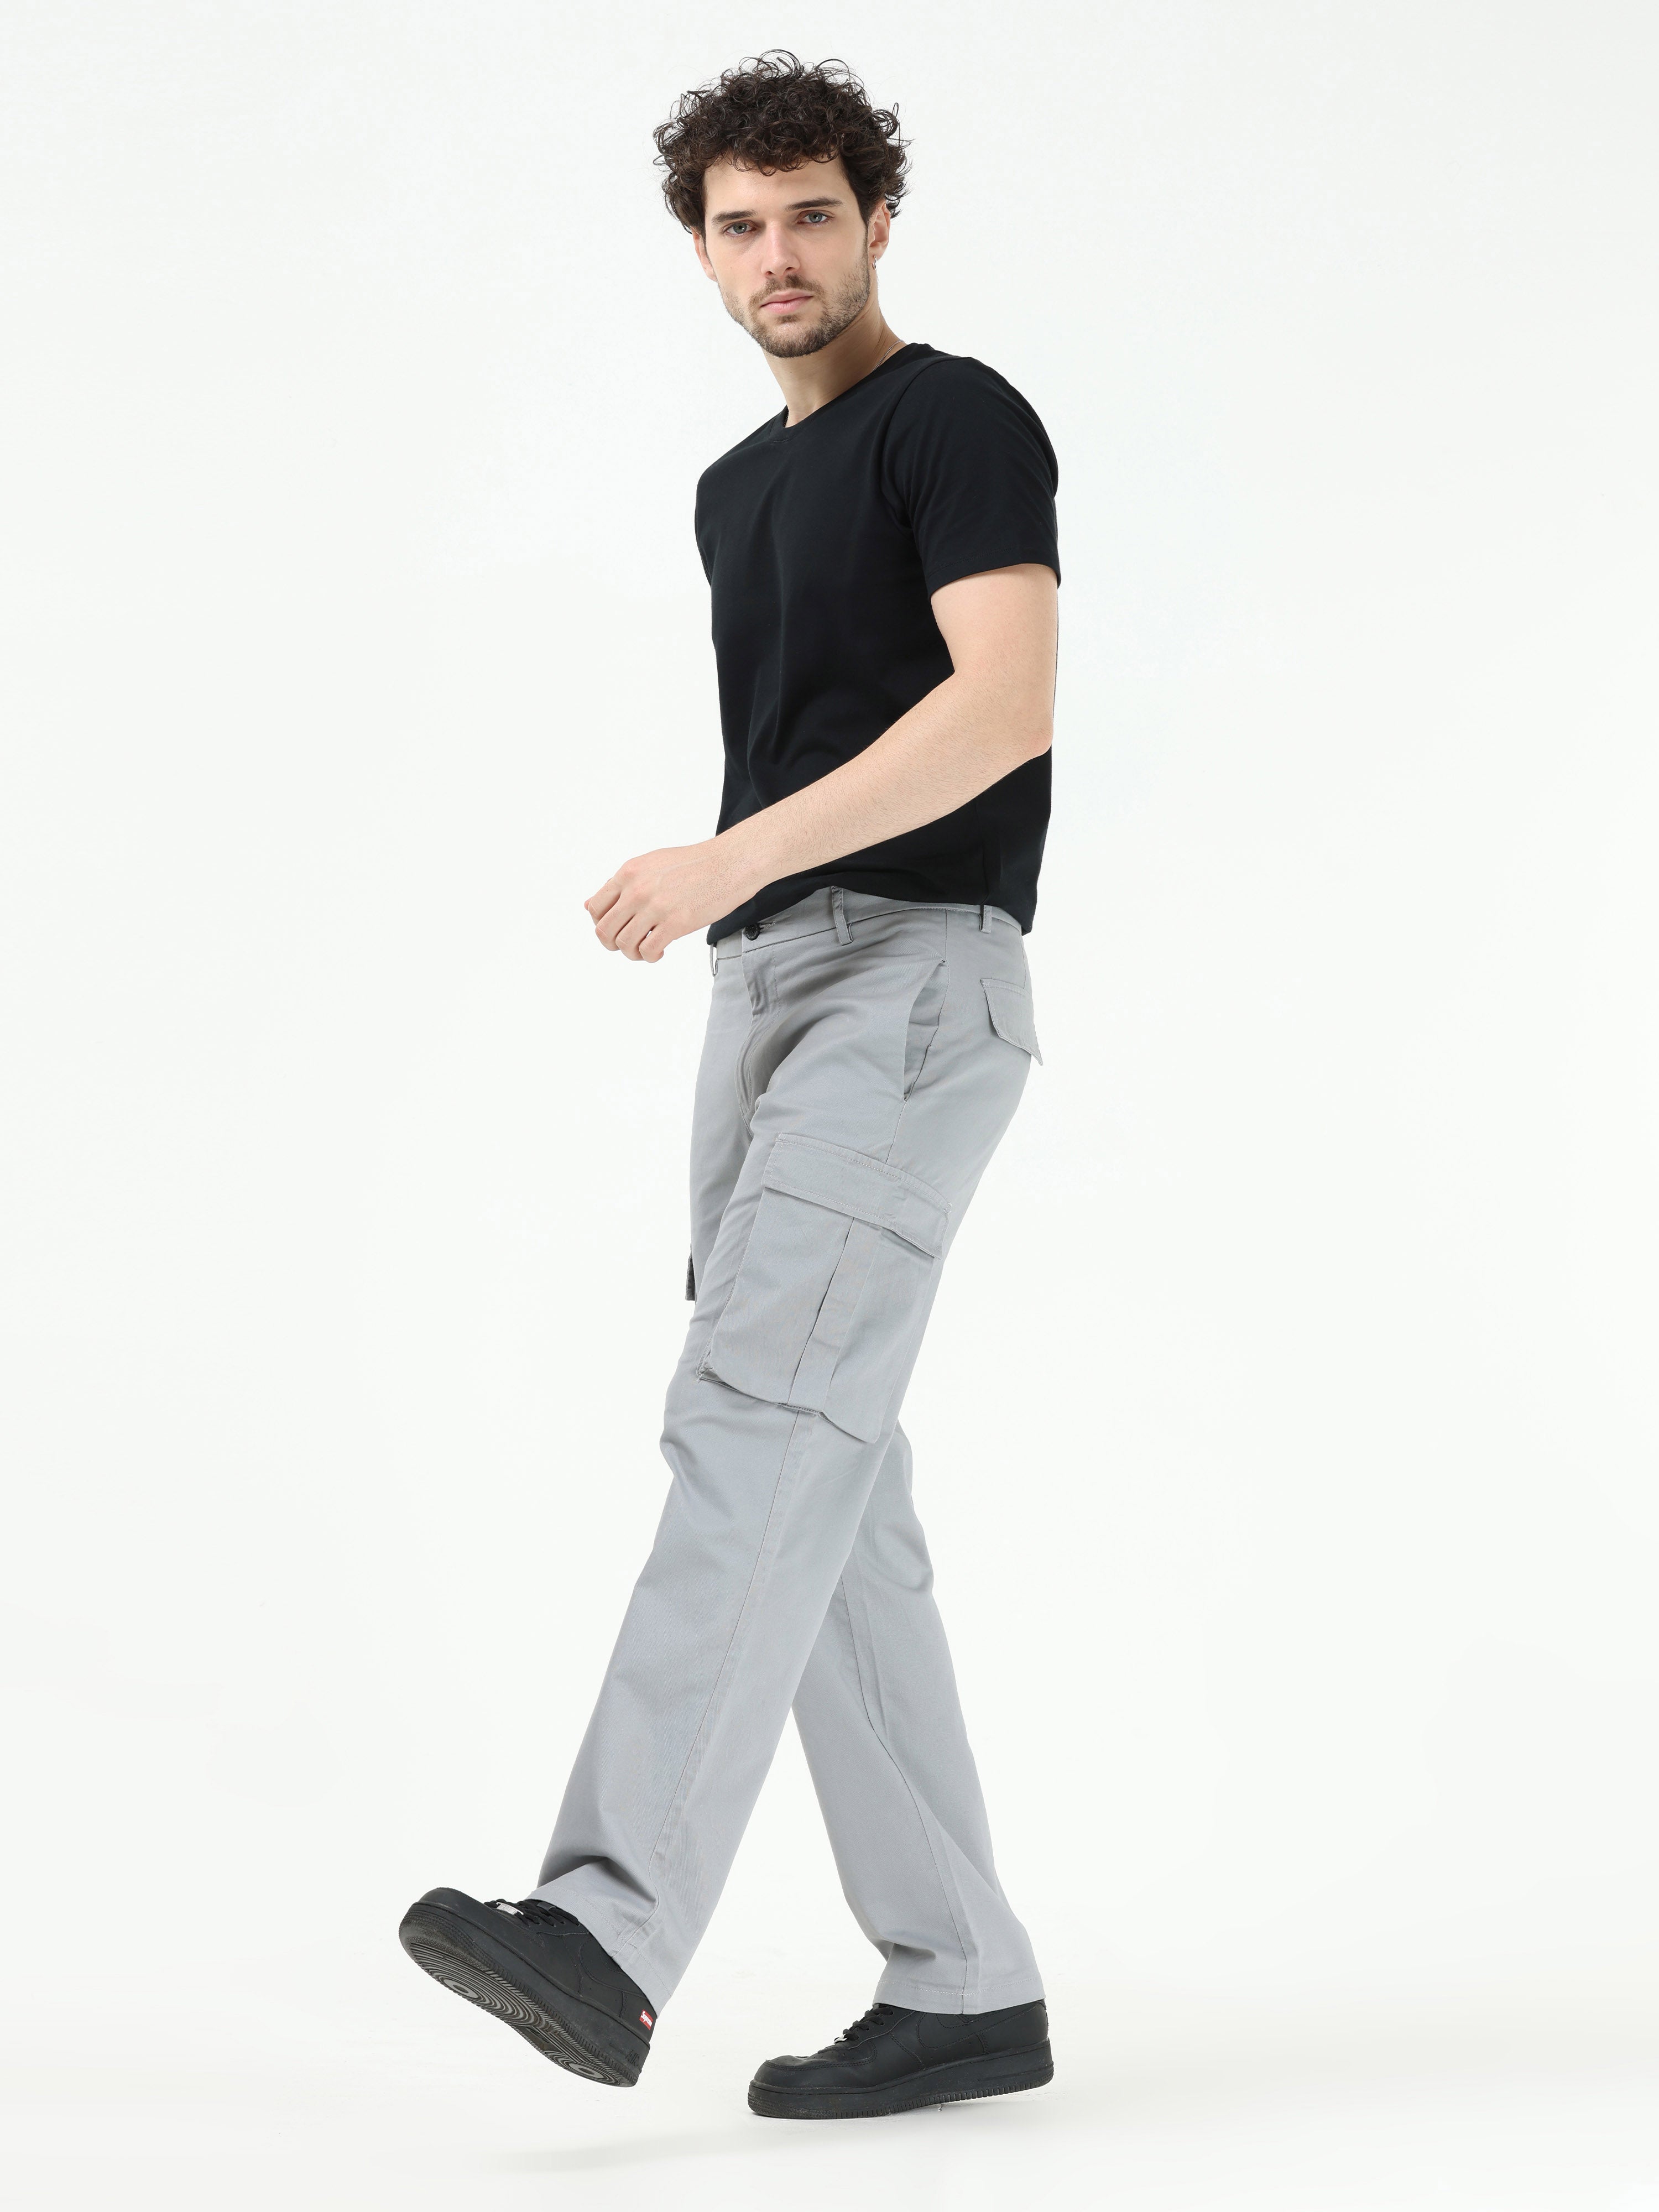 Finest Twill Light Grey Baggy Fit Cargo